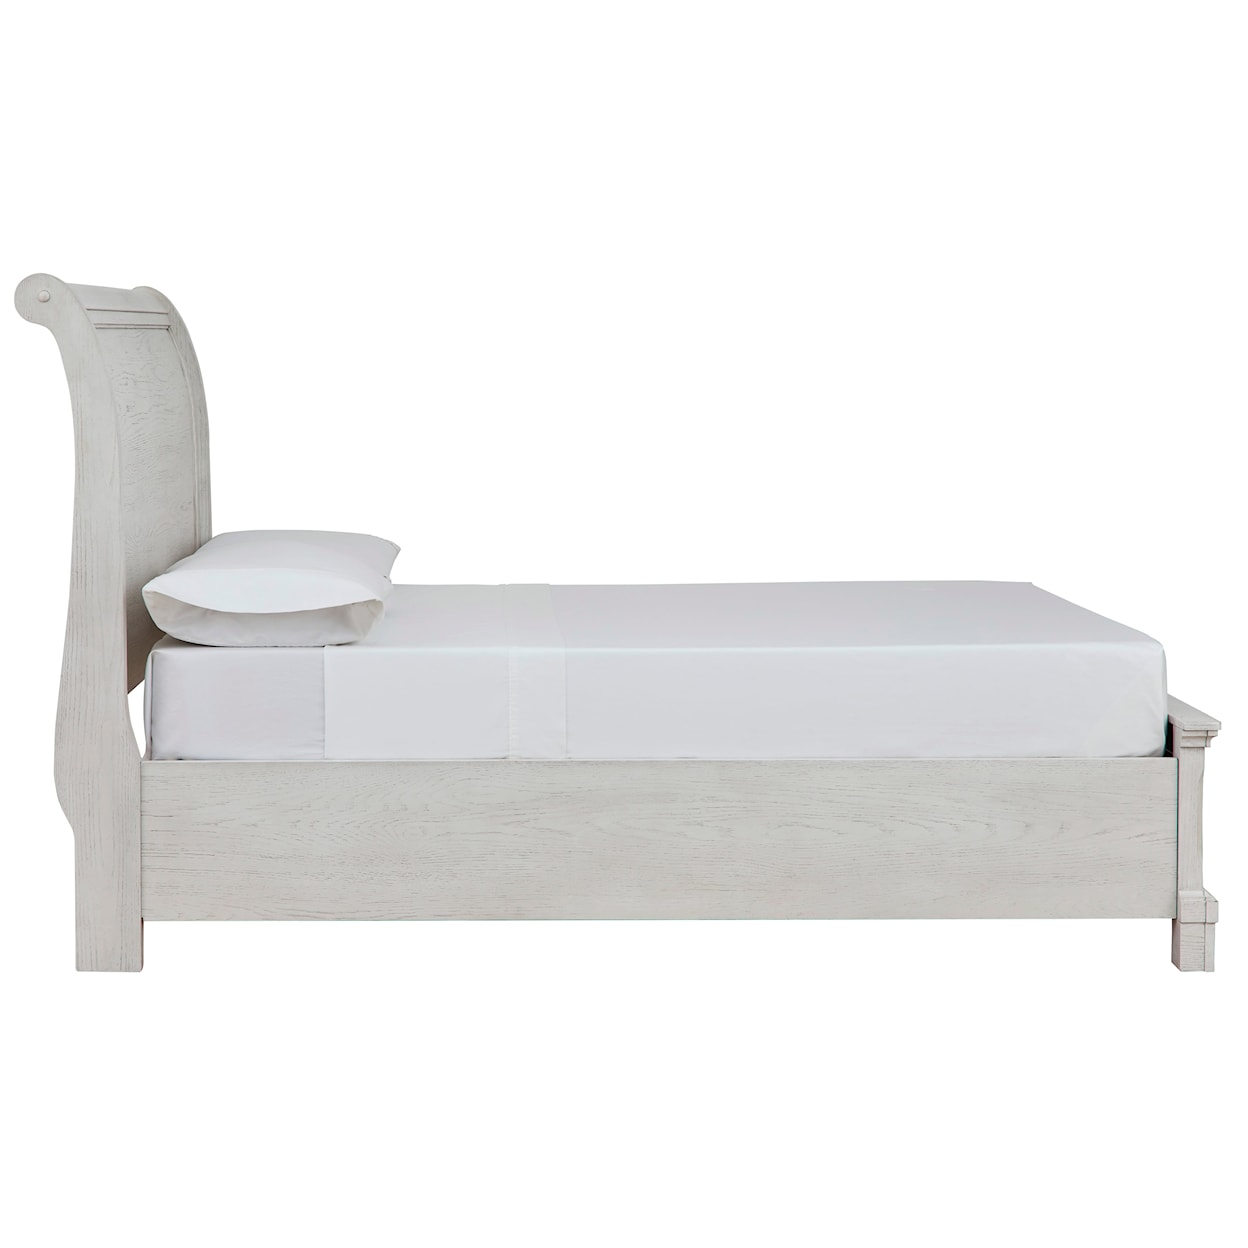 Signature Design by Ashley Robbinsdale Full Sleigh Bed with Storage